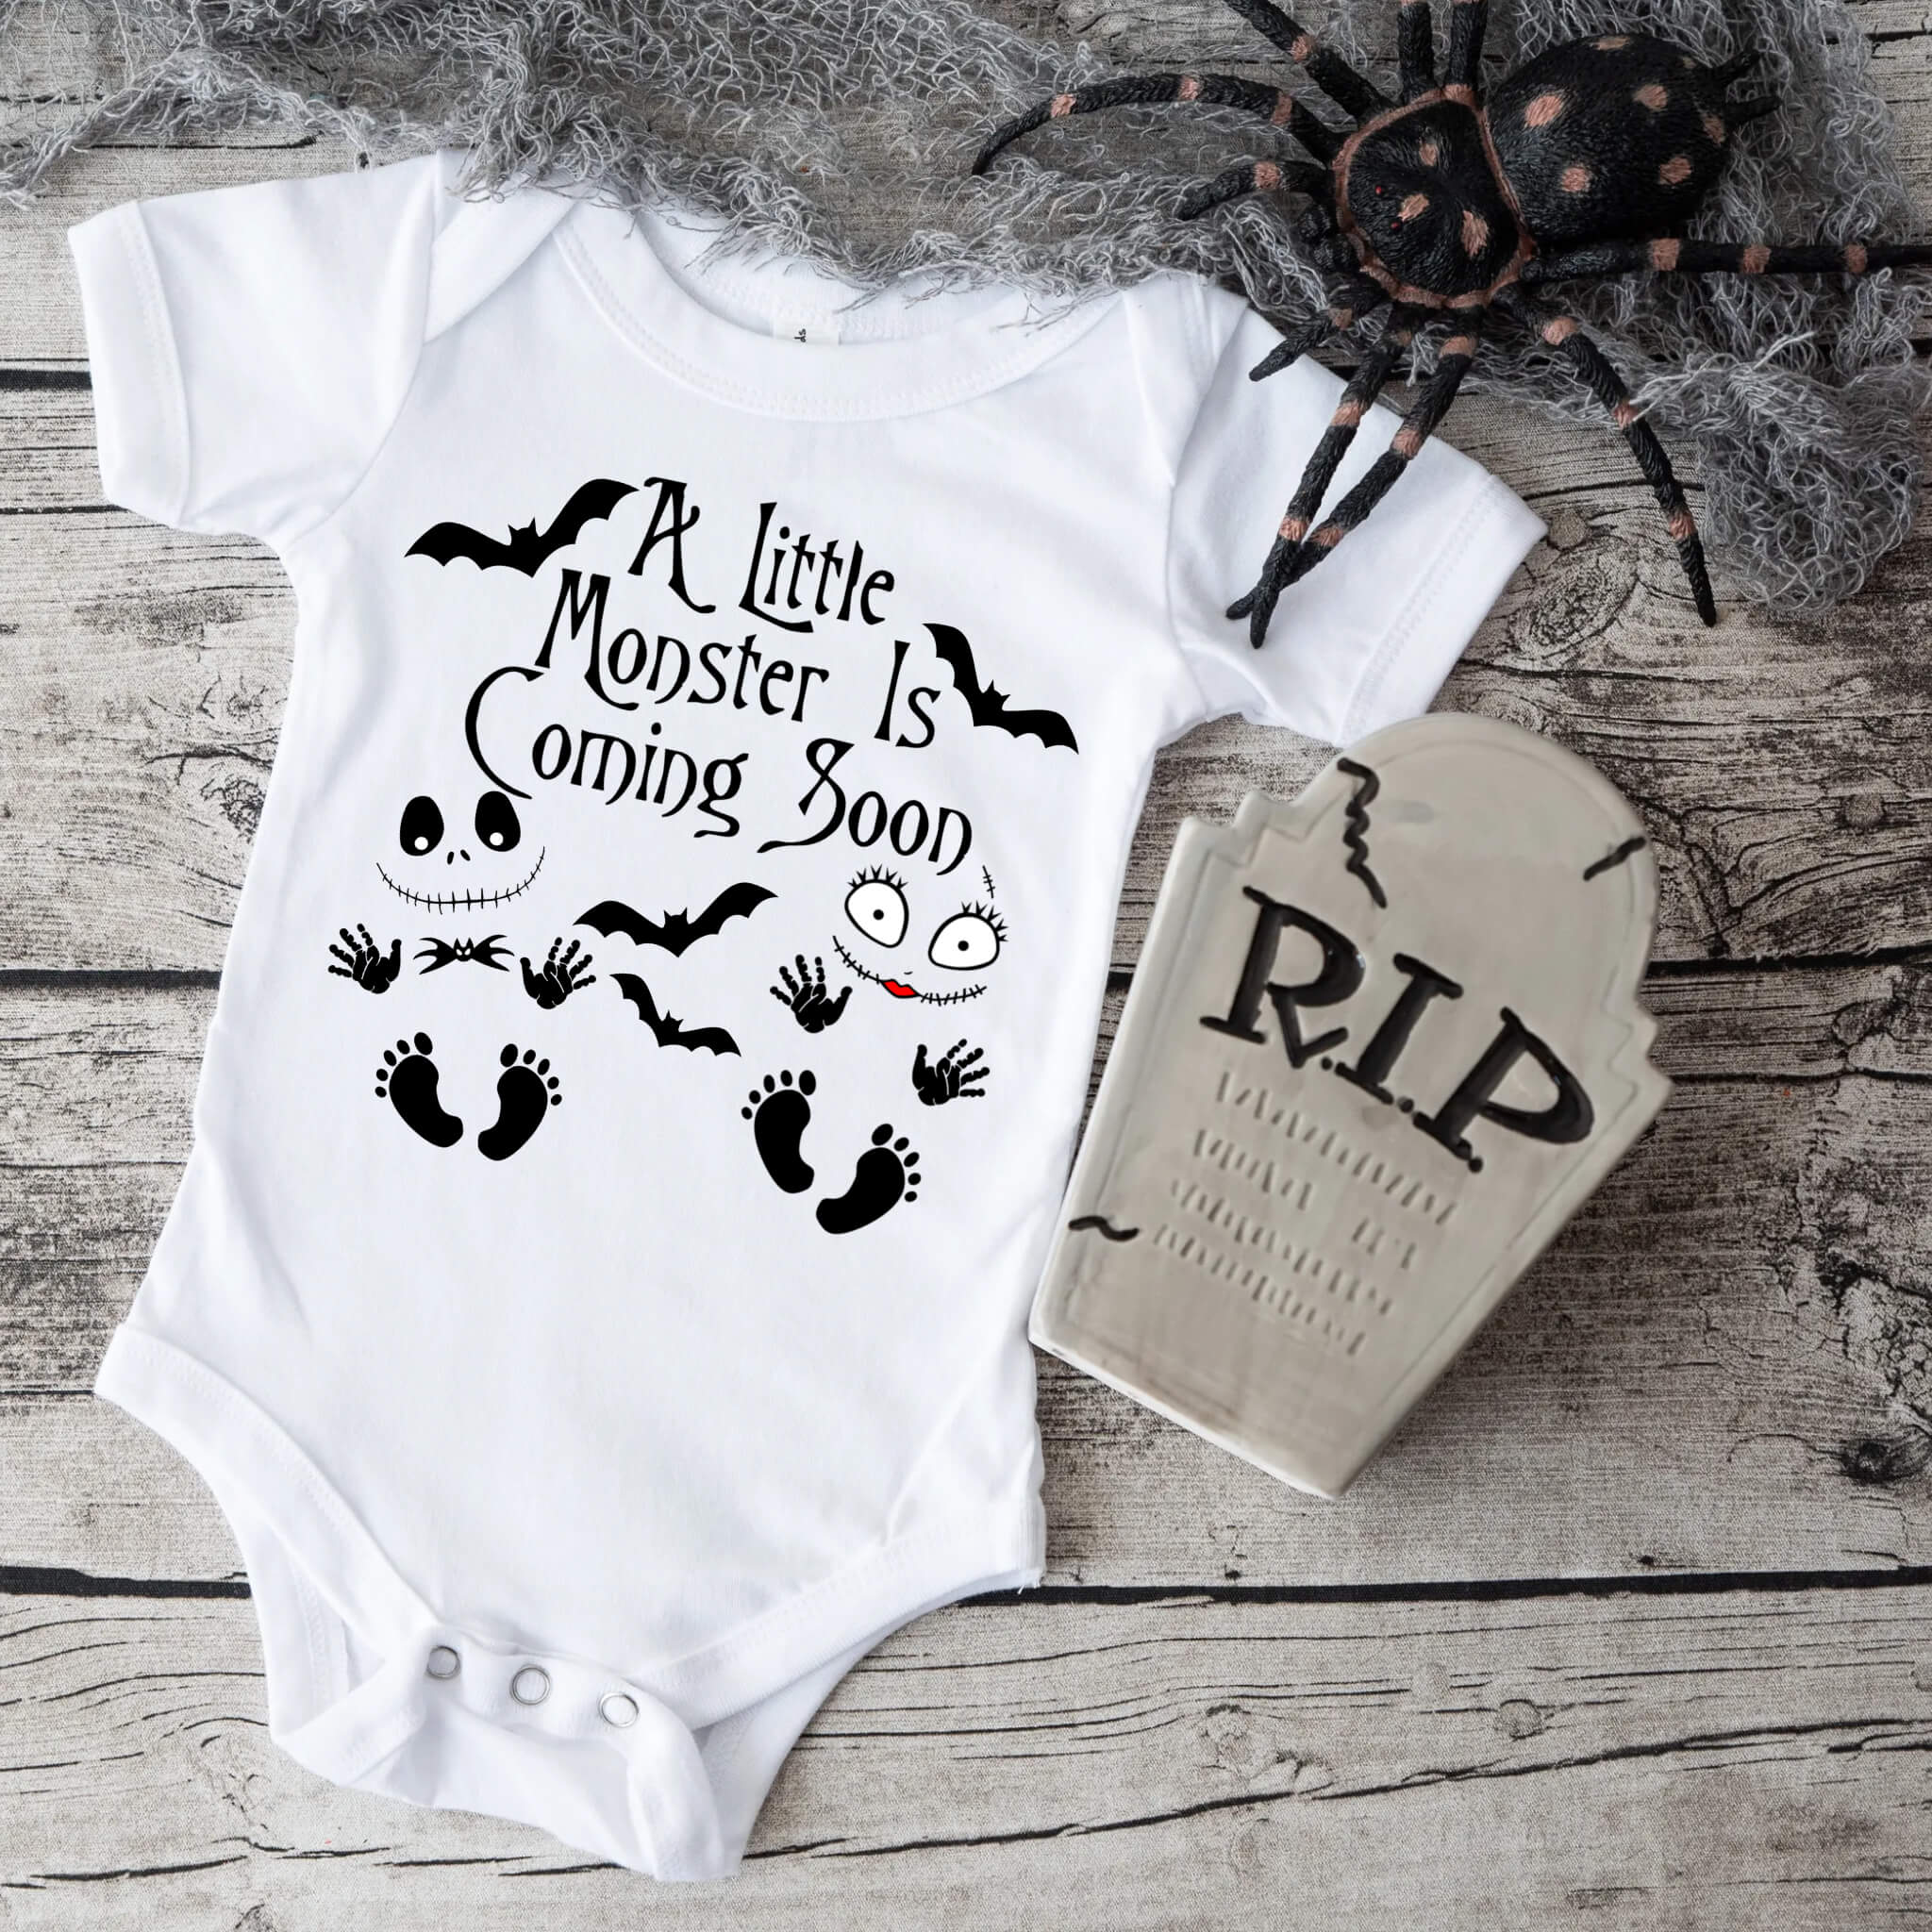 Personalized Pregnancy Announcement, Jack Skellington & Sally, Nightmare Before Christmas Themed